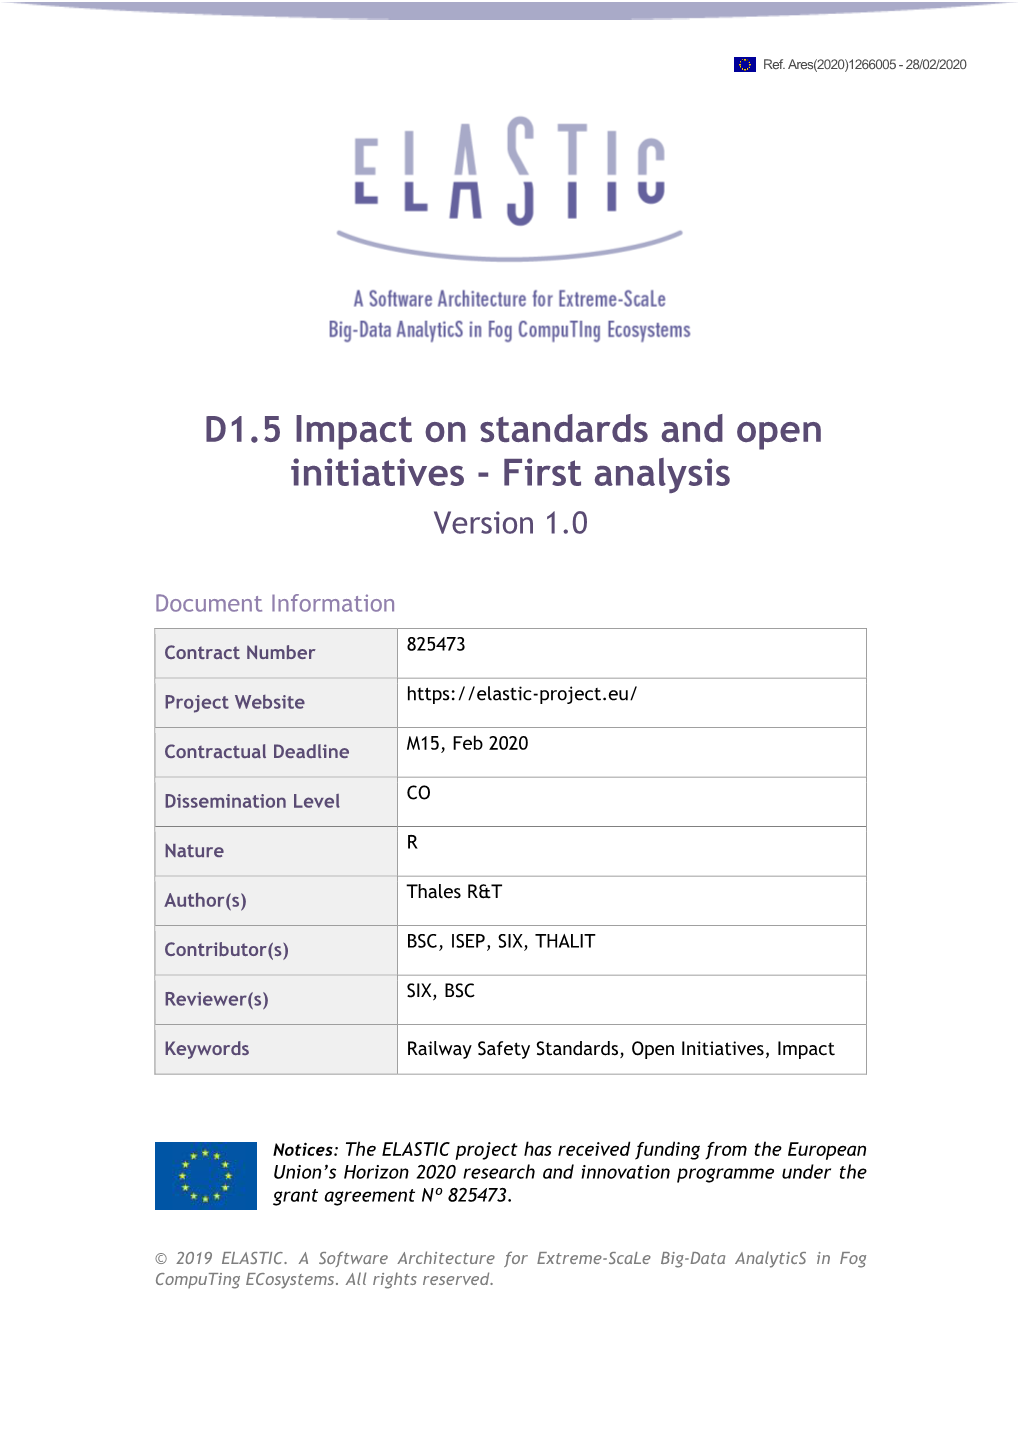 D1.5 Impact on Standards and Open Initiatives - First Analysis